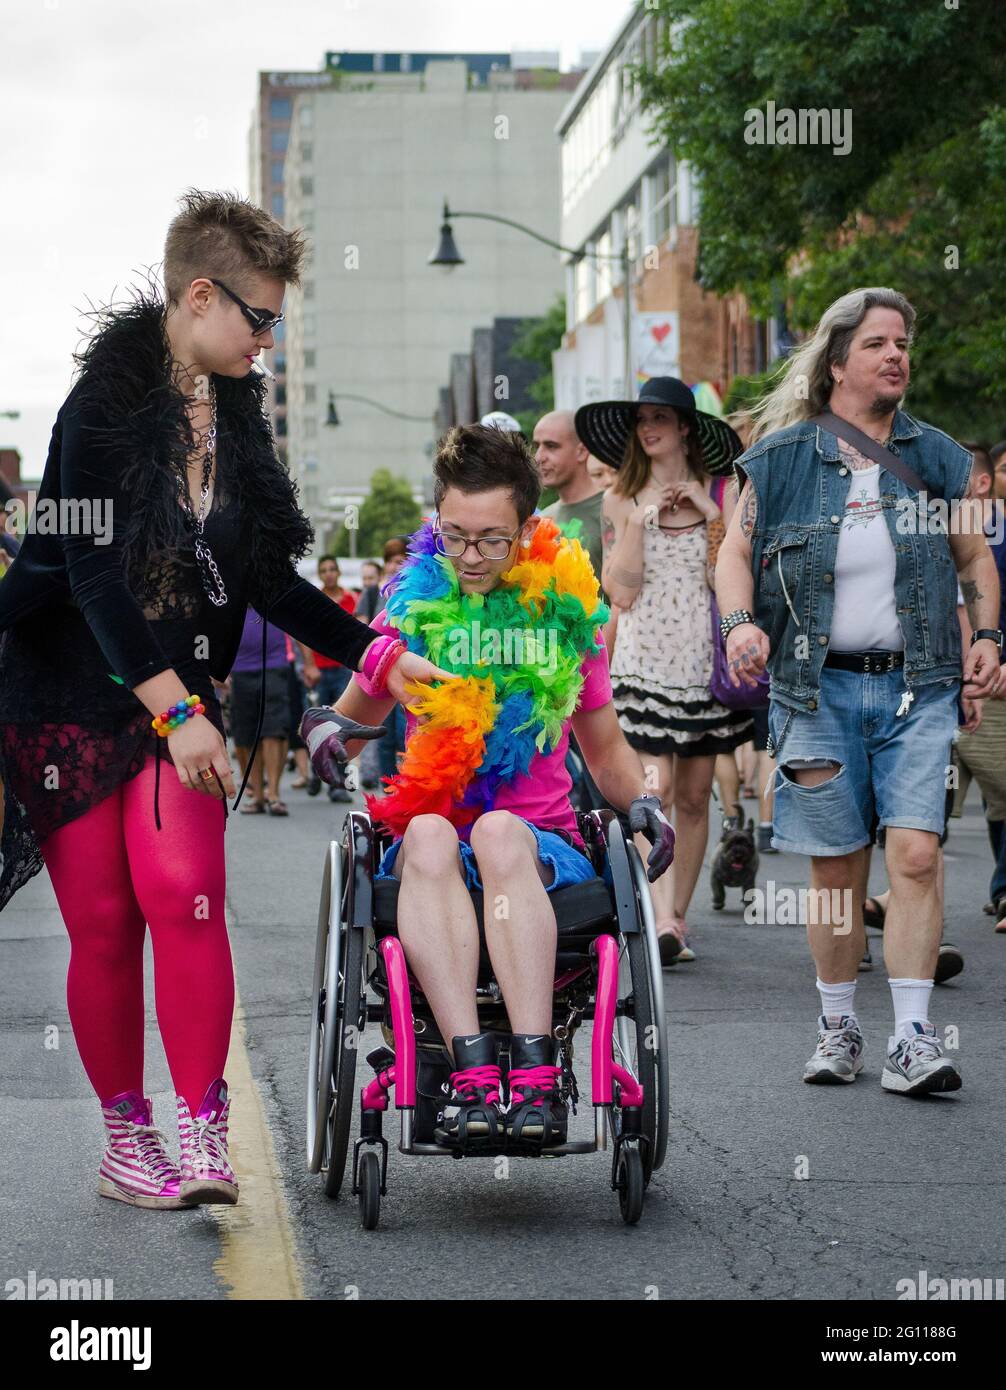 Wheelchair enabled participant in pride parade Toronto, wearing glasses and sporting a rainbow feather scarf going down the street with other marchers Stock Photo